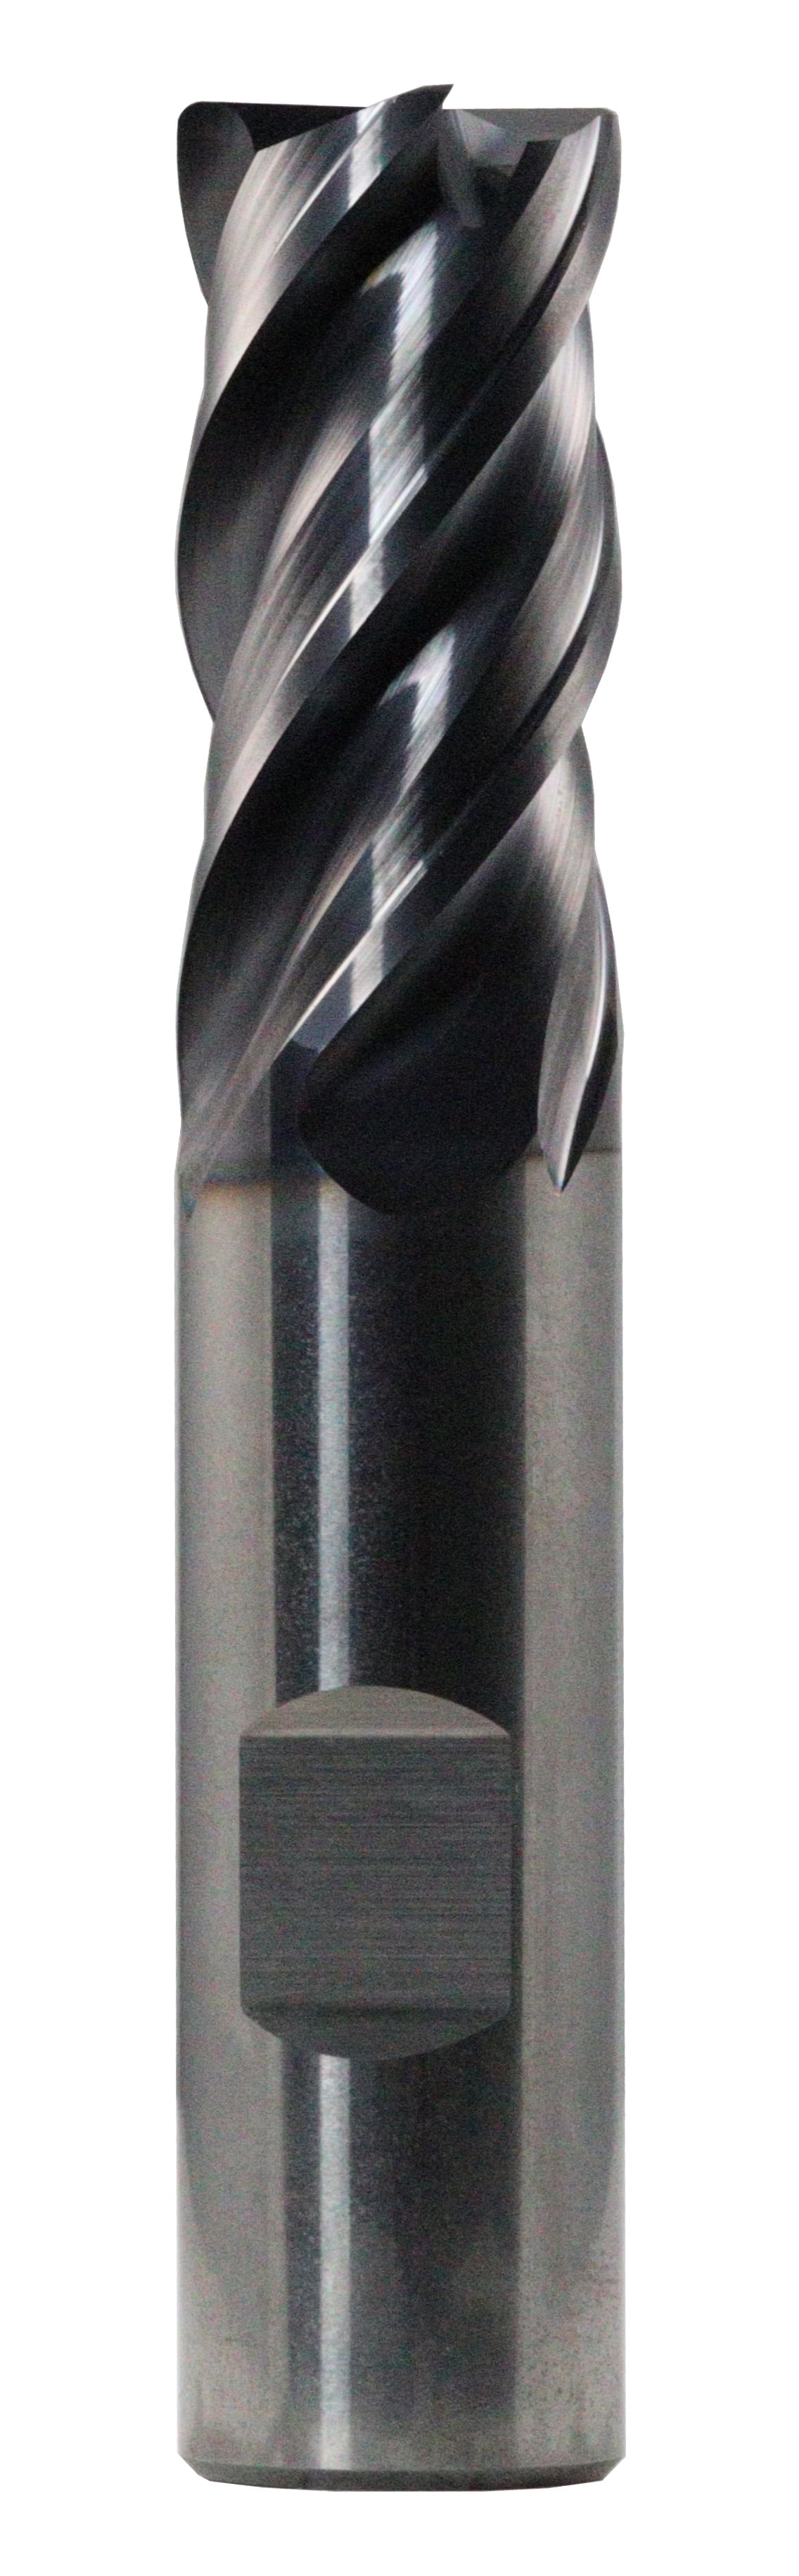 3/64" Dia, 2 Flute, Square End End Mill - 30399